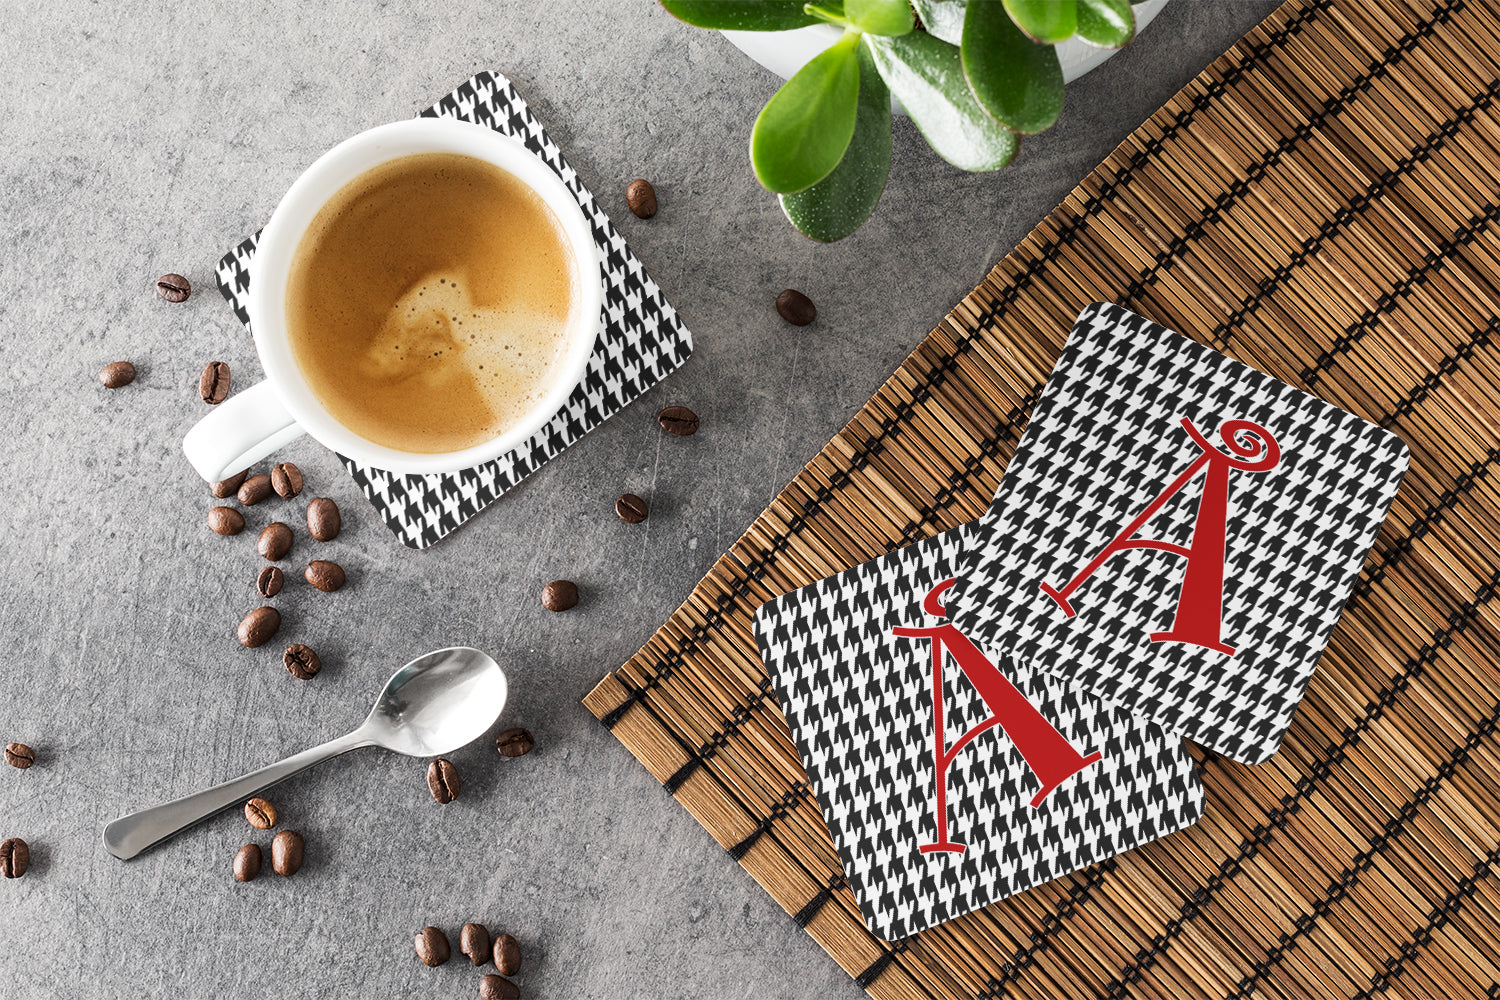 Set of 4 Letter A Monogram - Houndstooth Foam Coasters - the-store.com